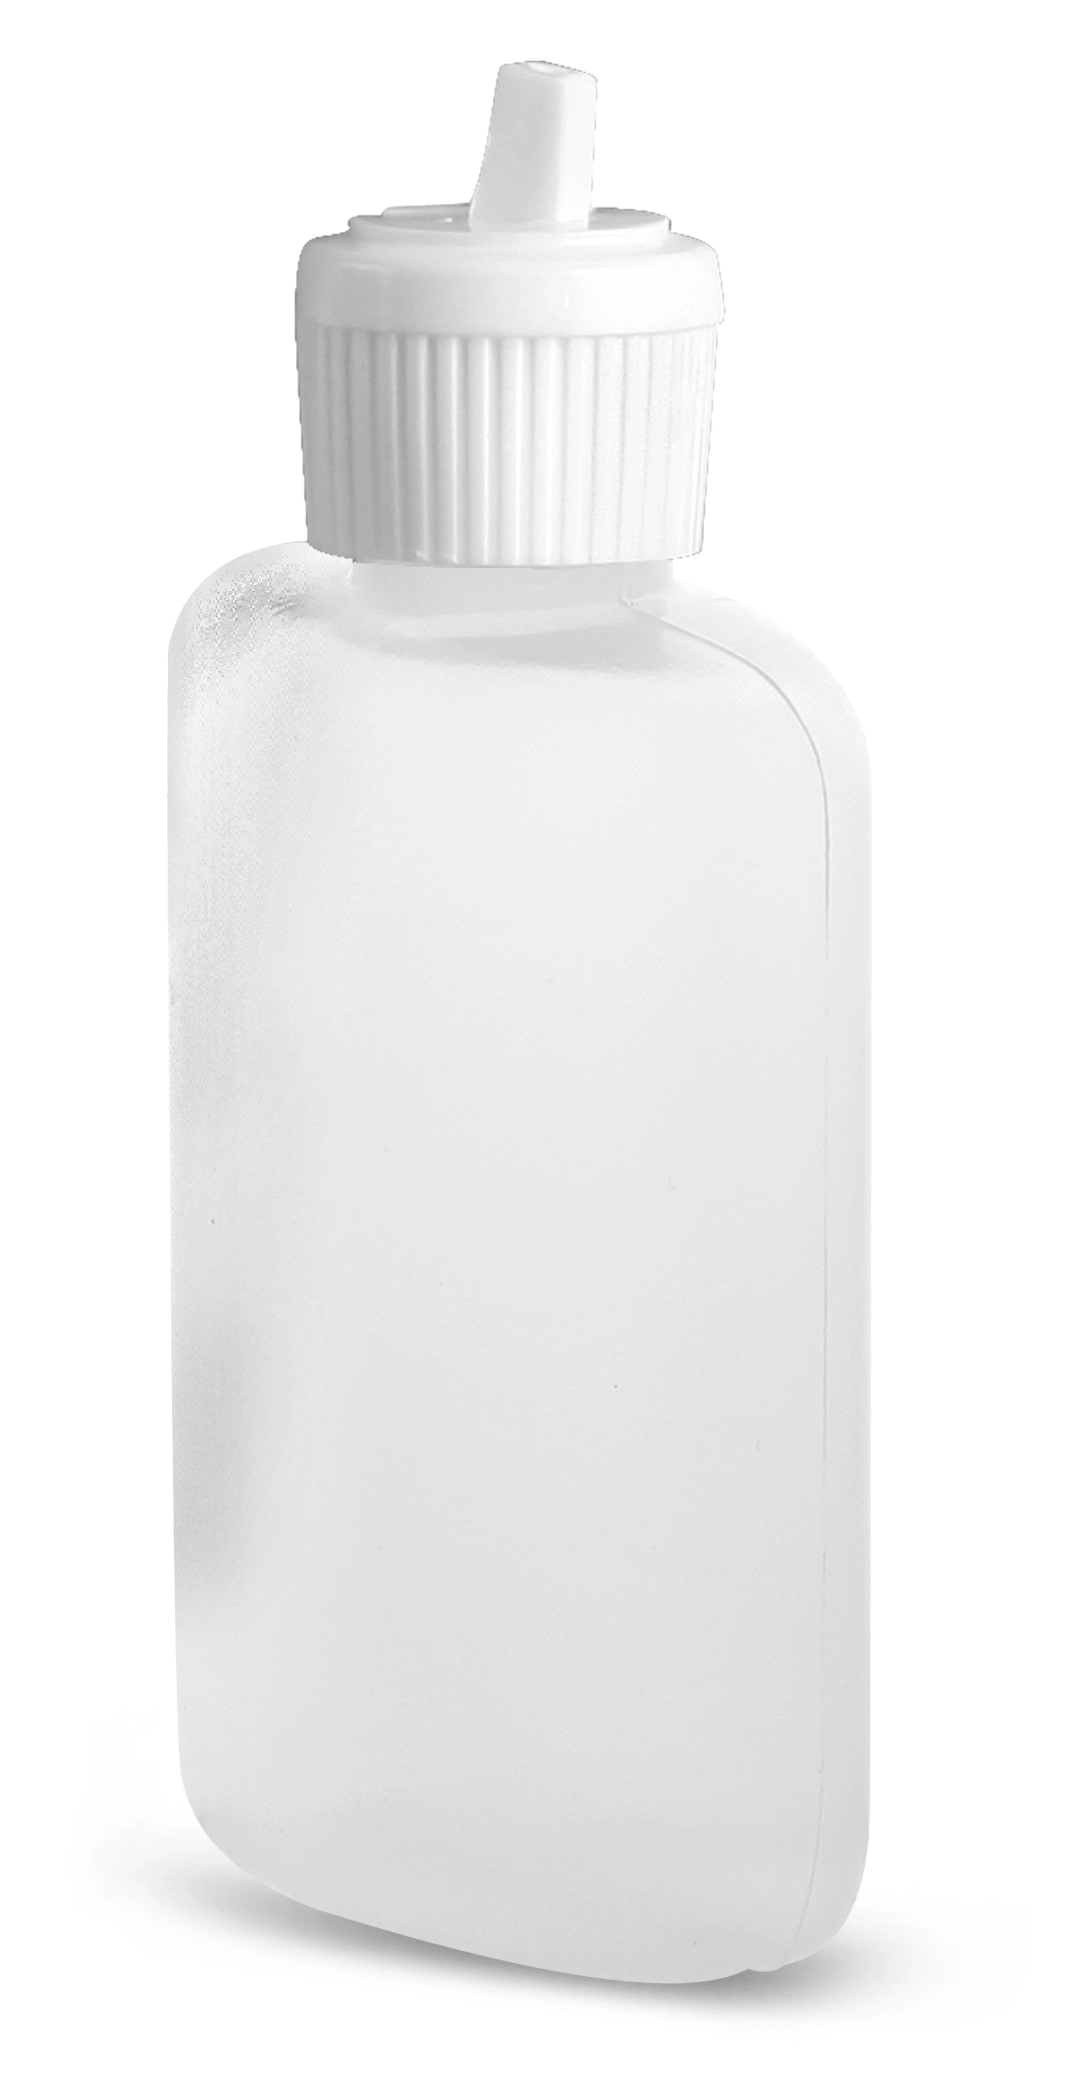 Packaging Deals - 2 oz Natural LDPE Straight Sided Oval Bottles w/ White Flip Top Spout Caps